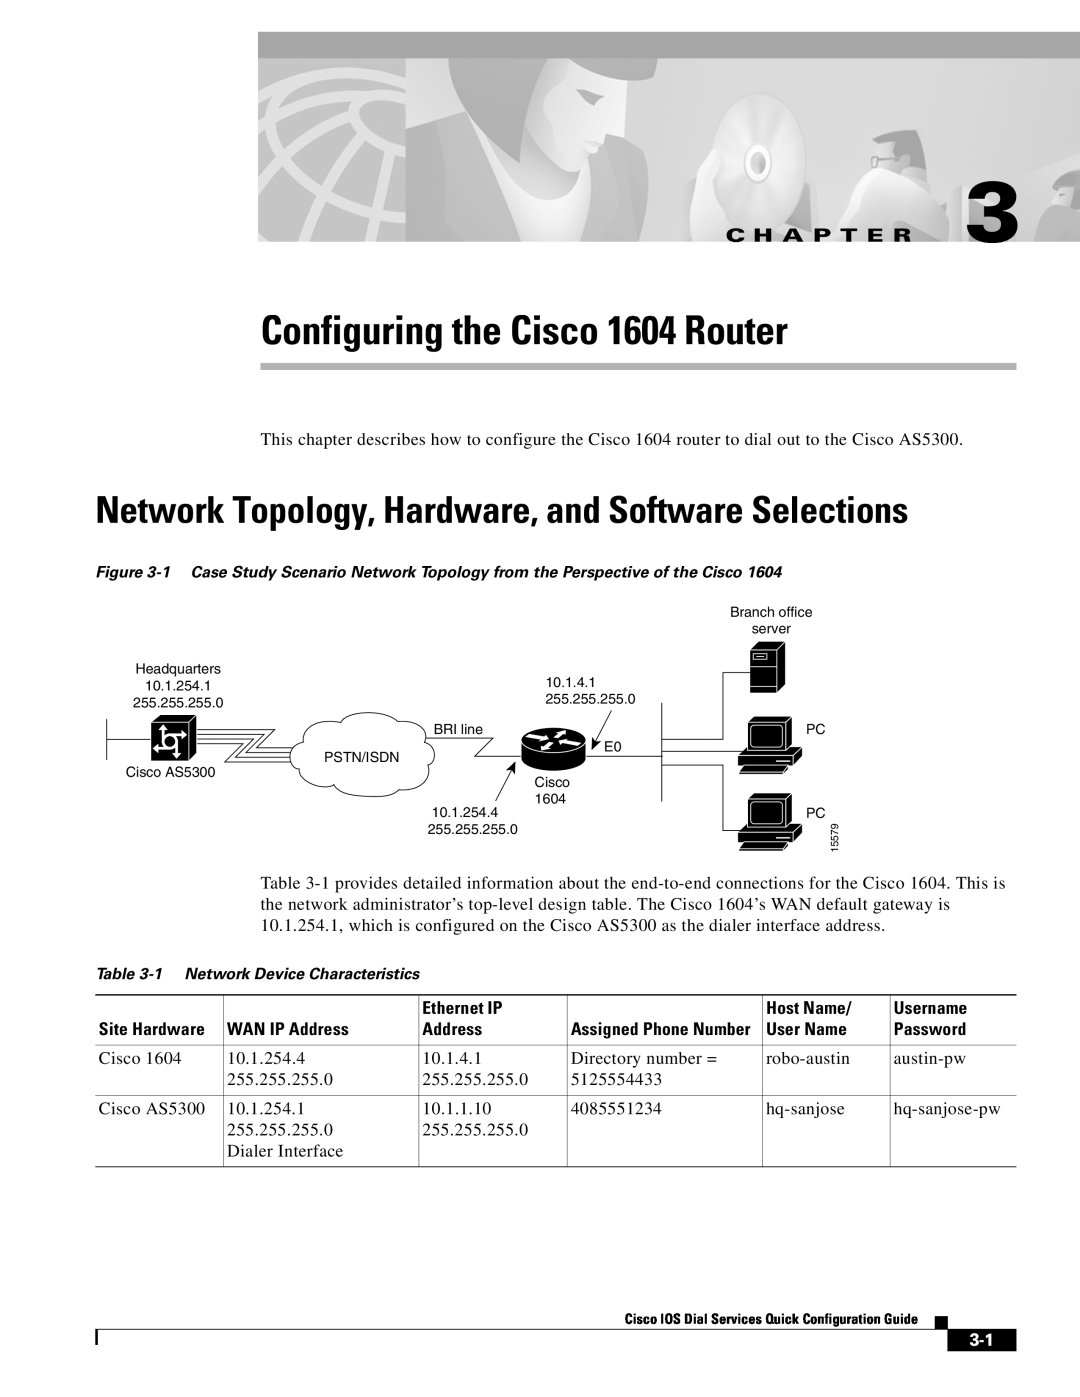 Cisco Systems 1604 manual Network Topology, Hardware, and Software Selections, C H A P T E R, Ethernet IP, Host Name 